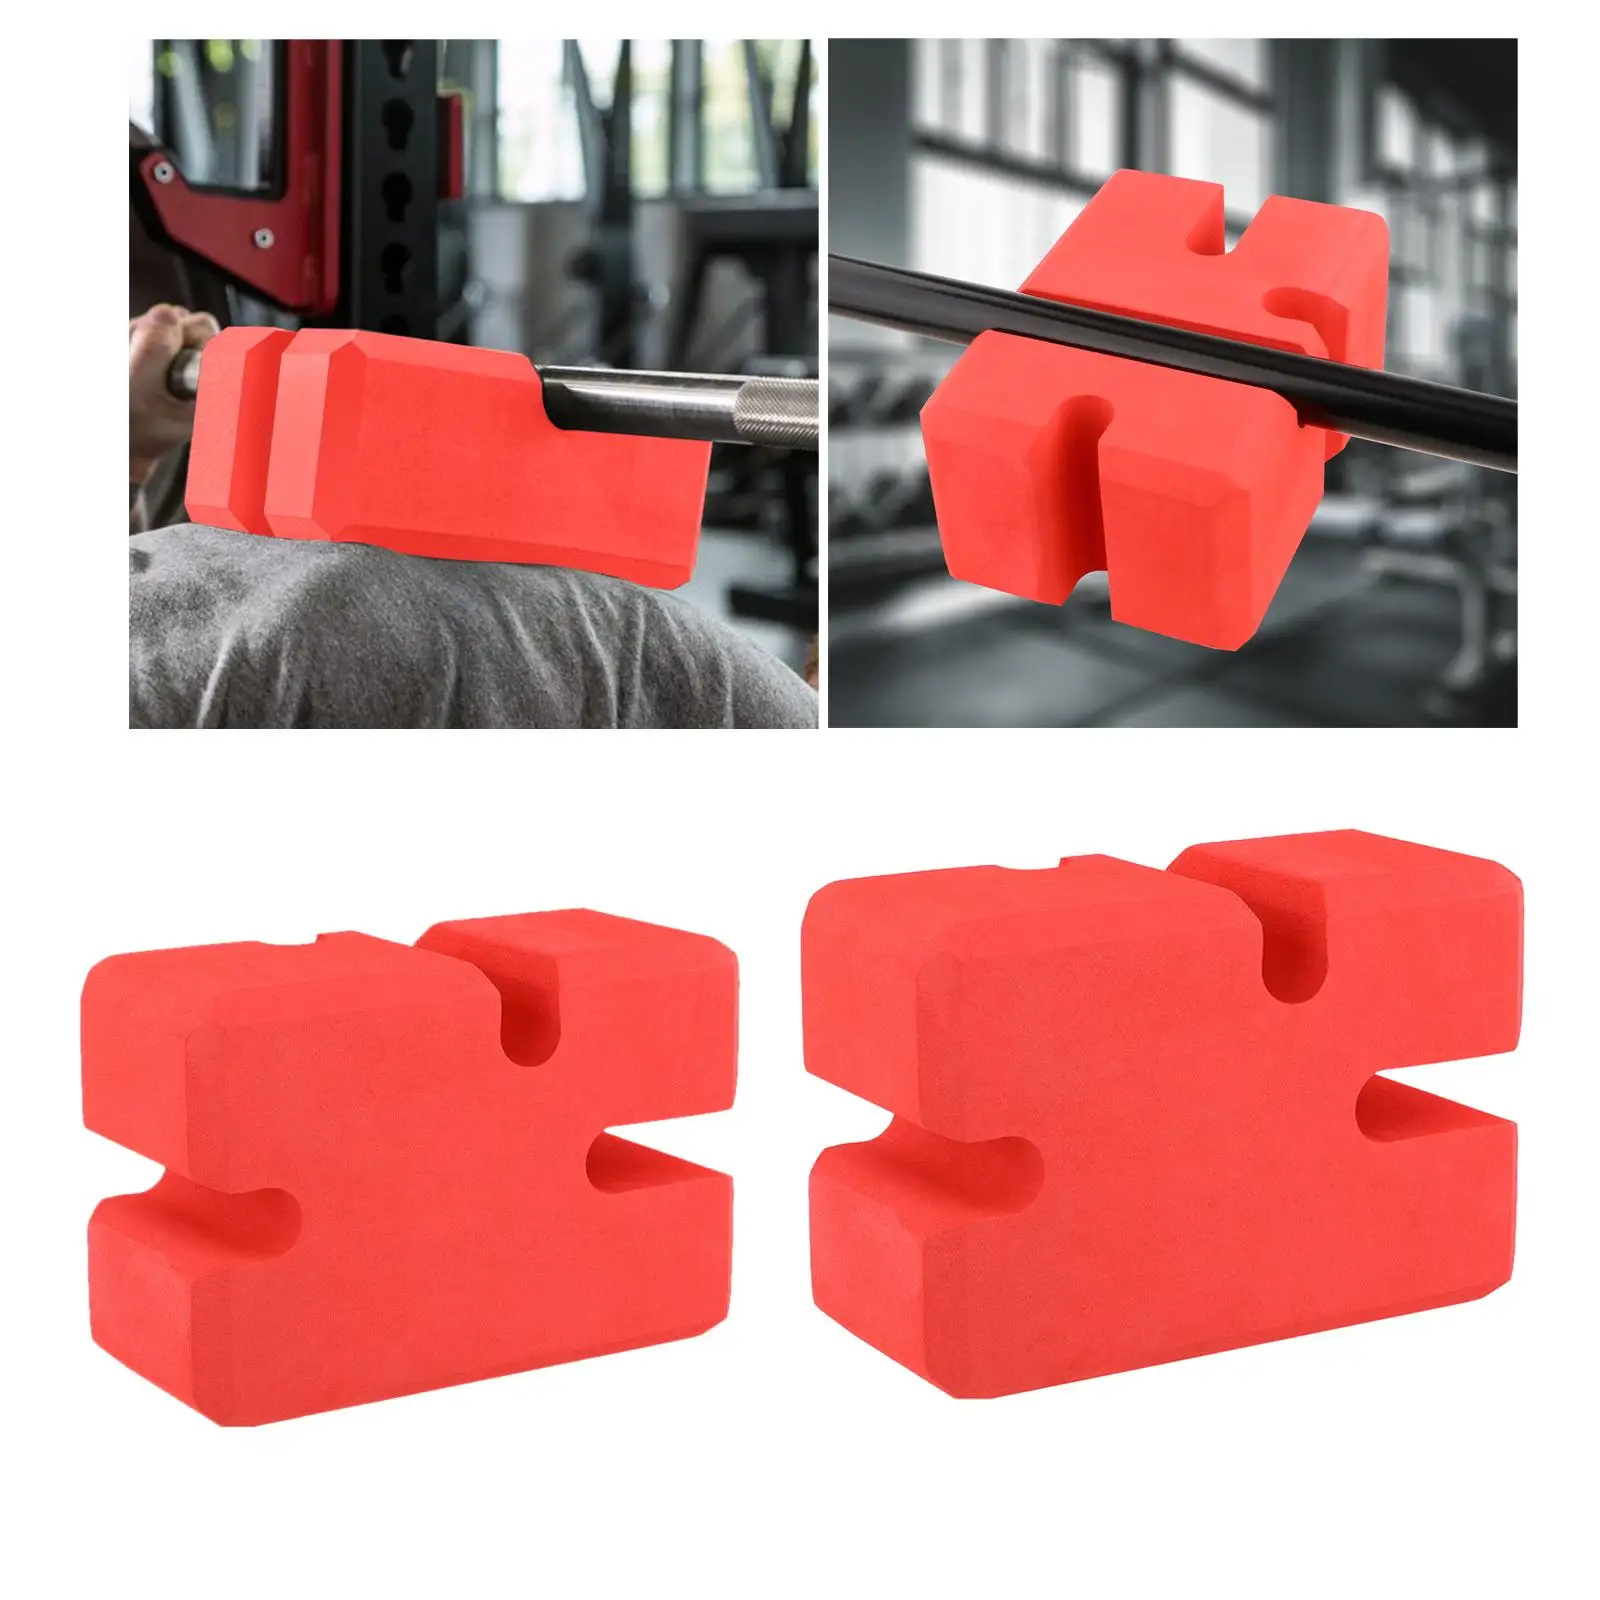 4-Height Bench Press Block, Adjustable Anti-slip Deep Squat Bench Block Pad, Barbell Bar Grip for Different Angle Training